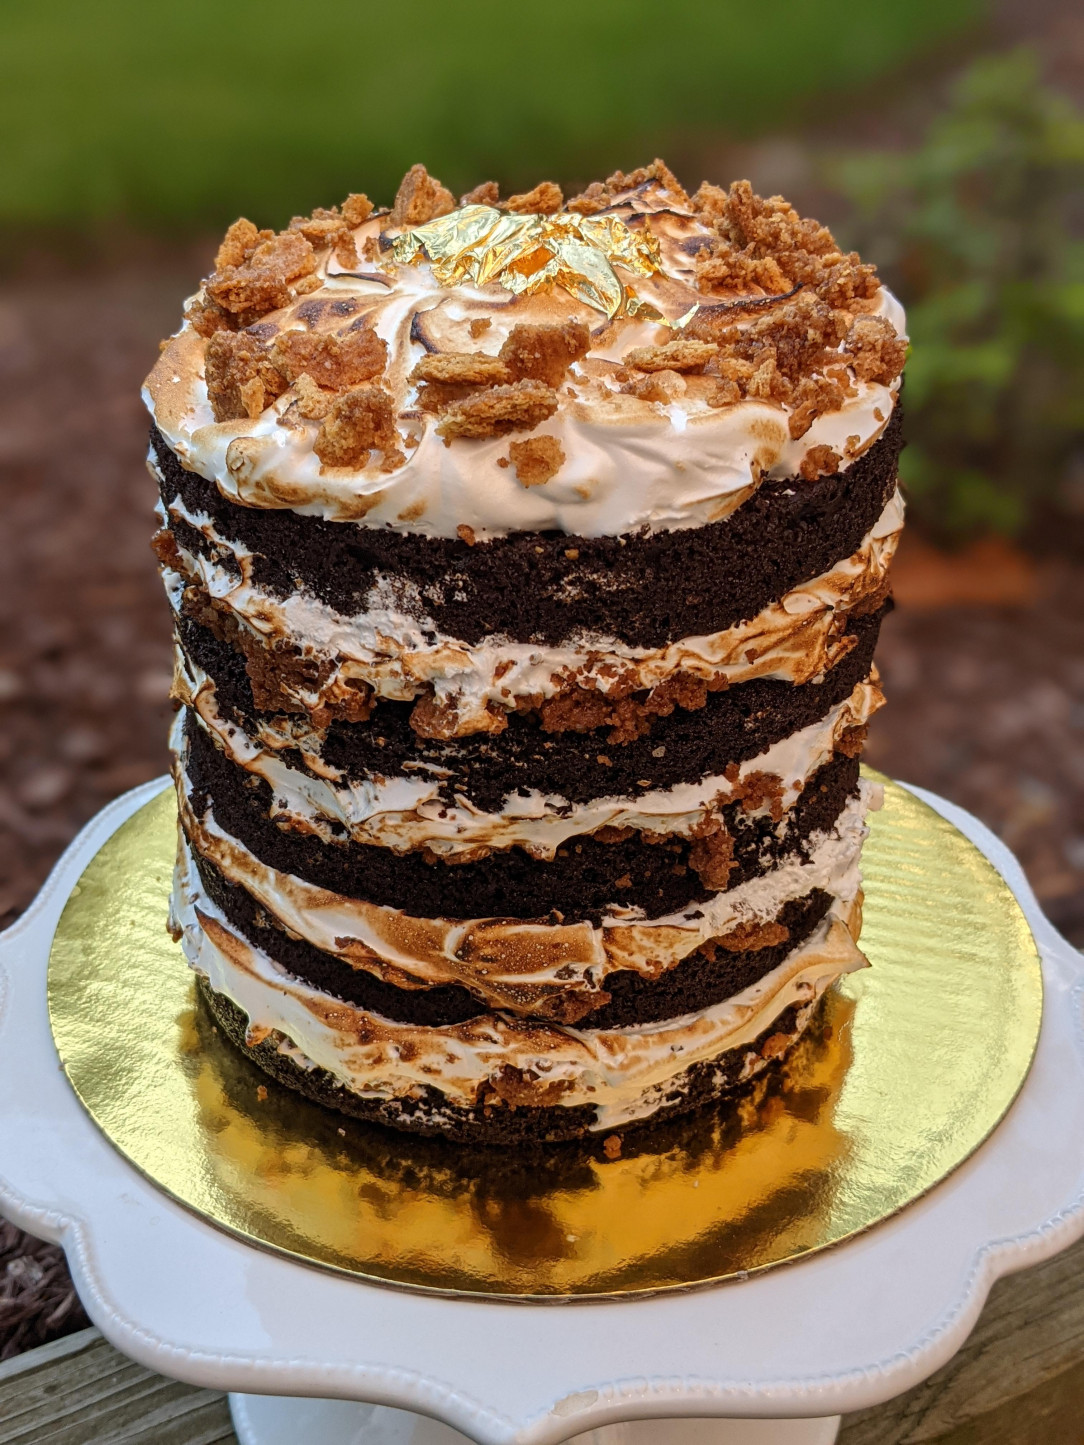 &quot;Smore&quot; cake: chocolate layers, toasted meringue, graham cracker crumble